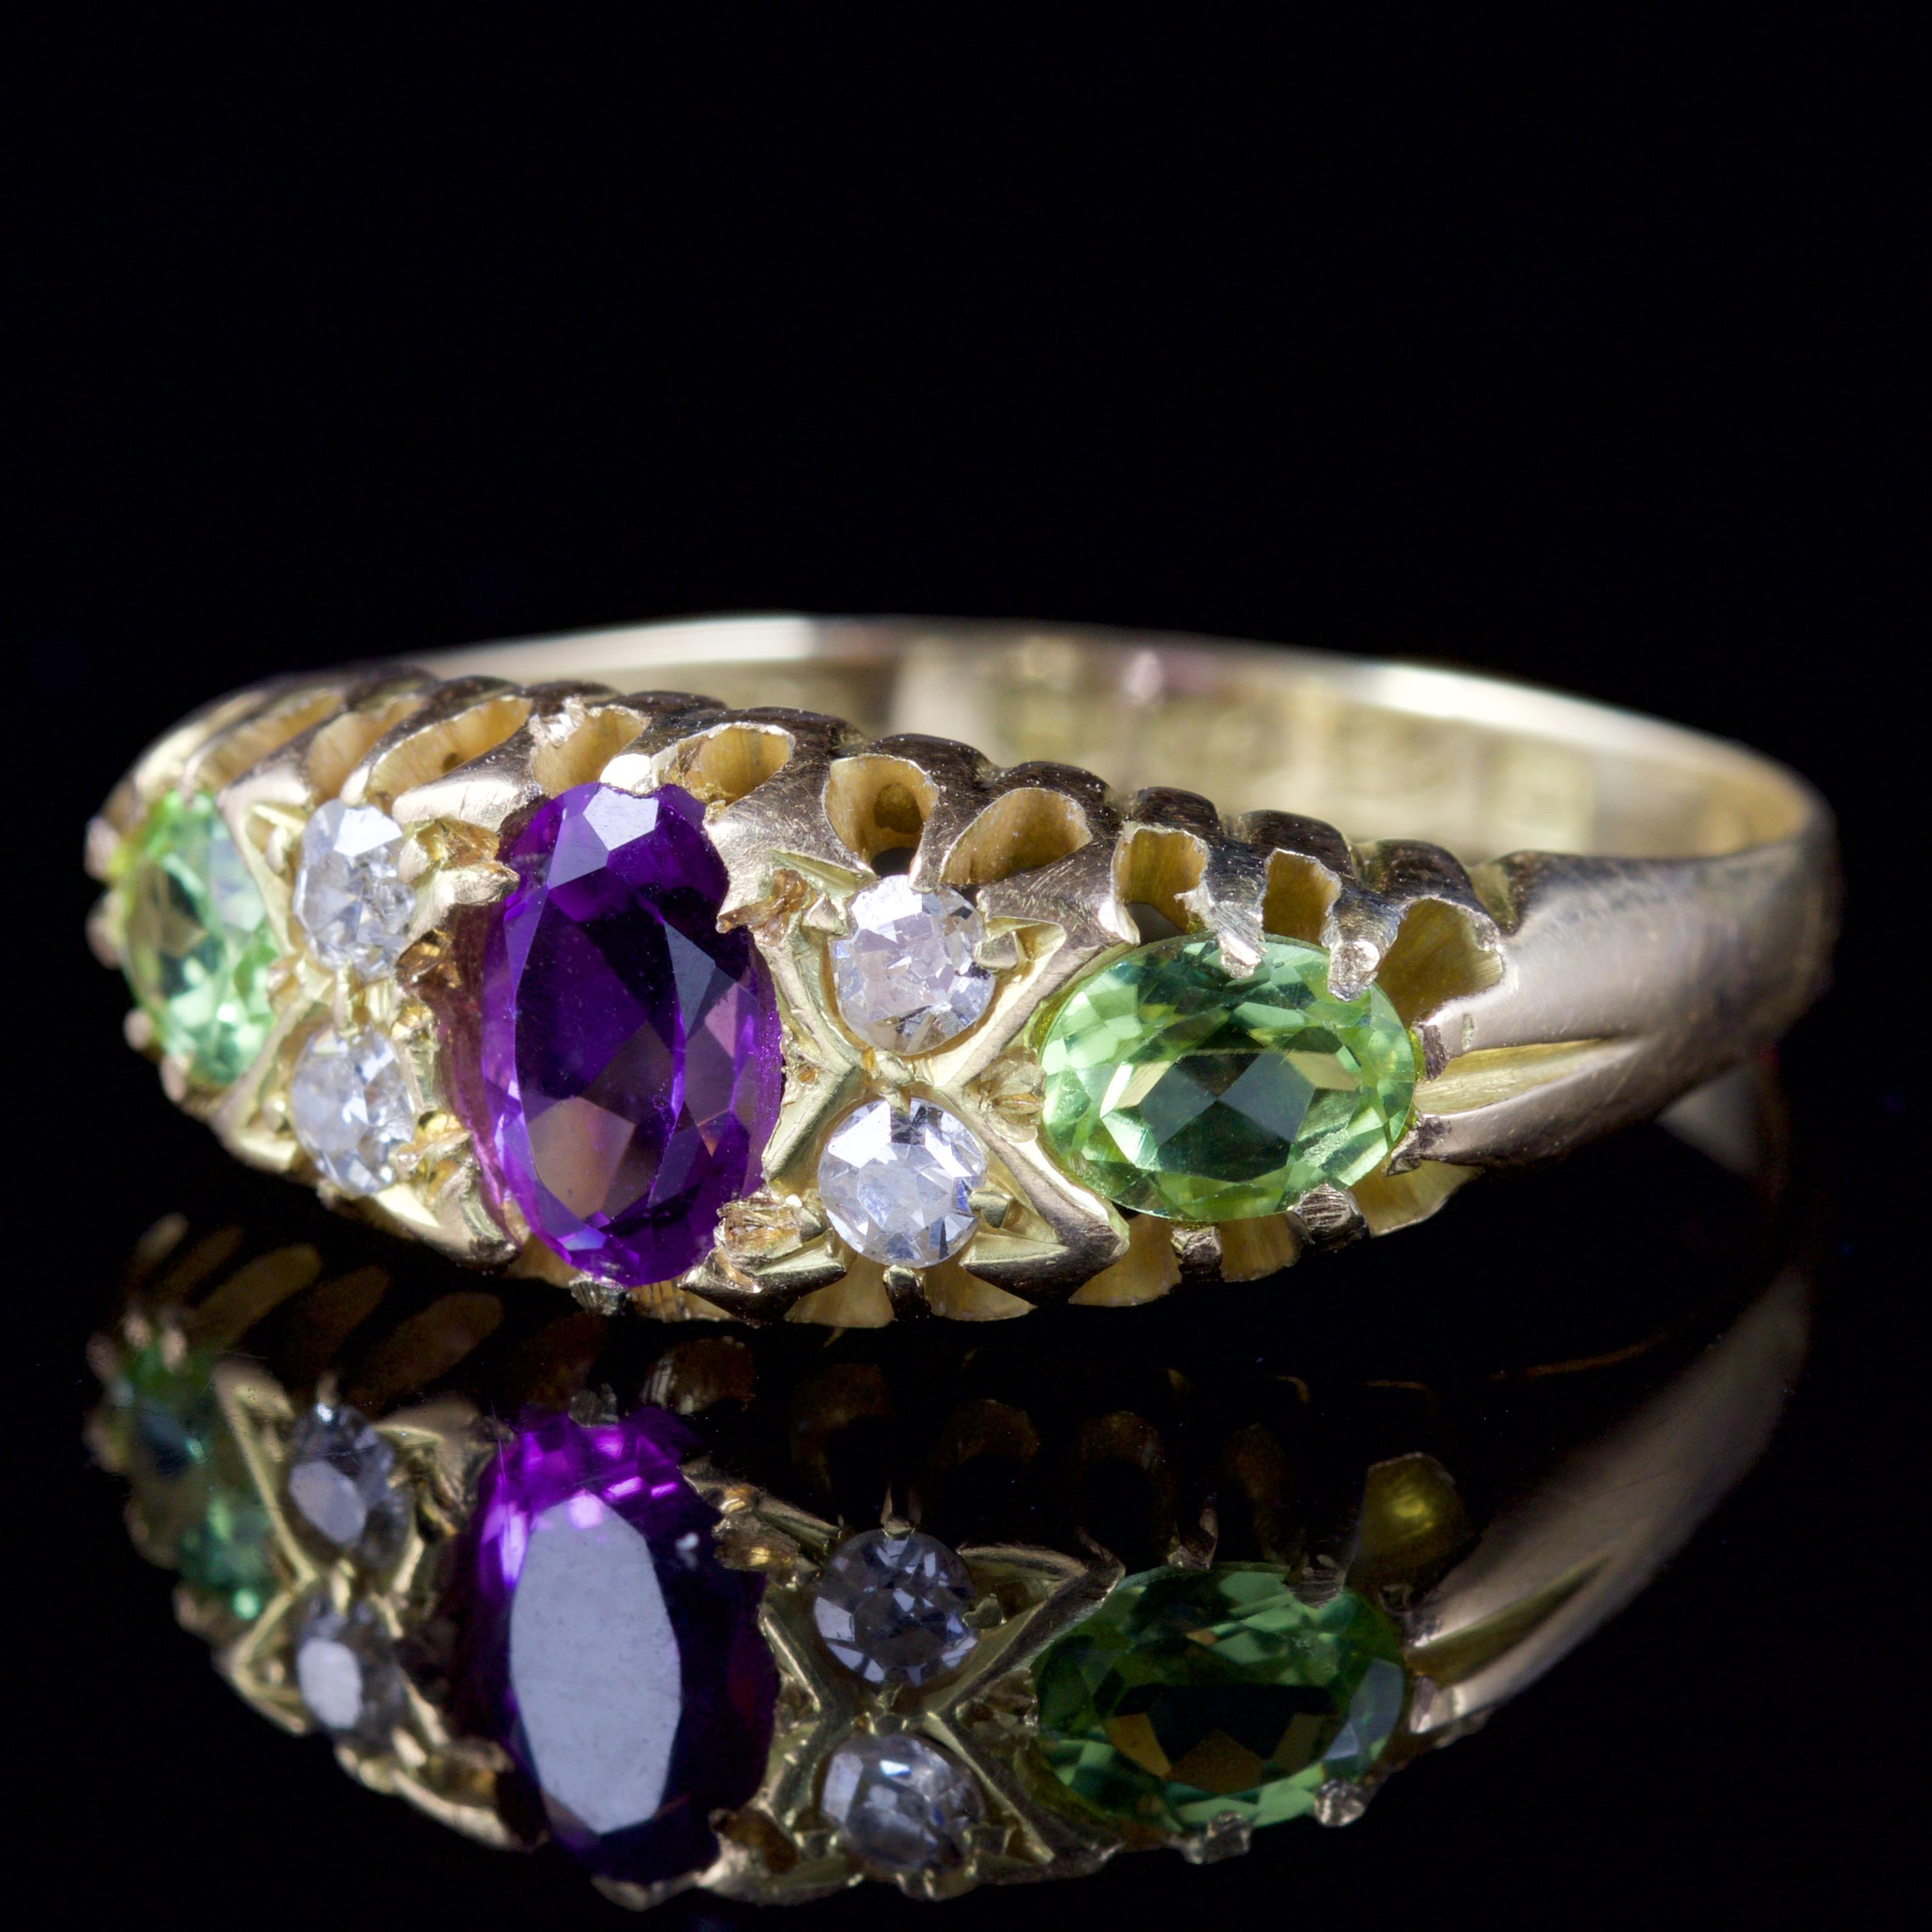 This marvellous Victorian 18ct Yellow Gold Suffragette ring is dated, Chester 1915.

The ring boasts craftsmanship, it is beautifully decorated in an Amethyst, two Peridots and sparkling Diamonds which are nestled in-between them gemstones.

The